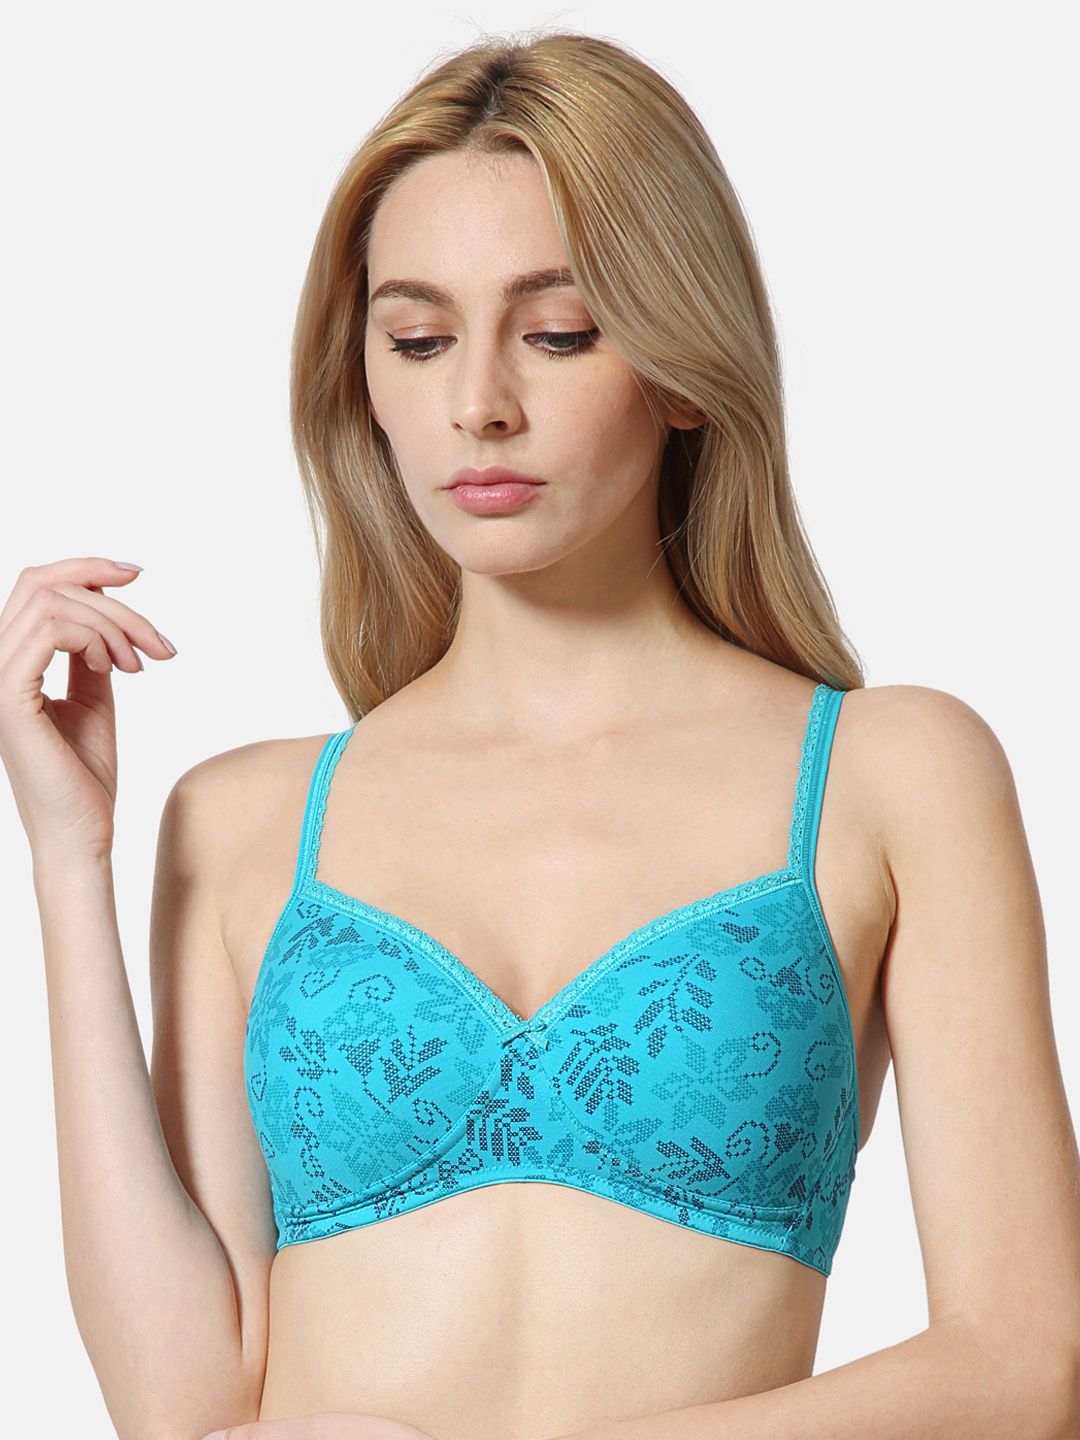 Van Heusen Blue Printed Non-Wired Lightly Padded Everyday Bra ILIBR1CSPIW7811003 Price in India